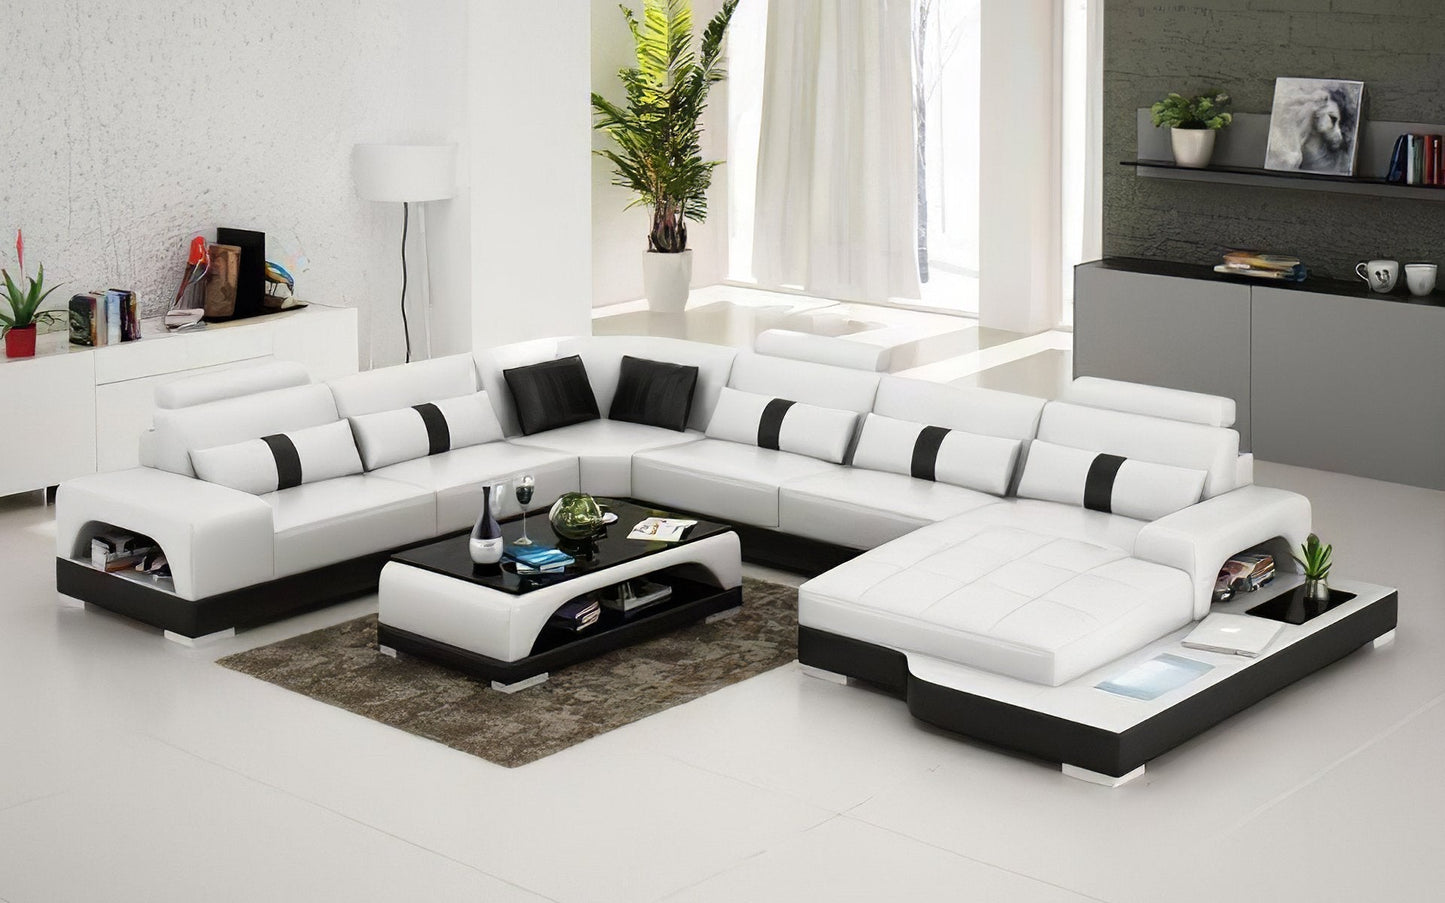 Stellar Large Leather Sectional with LED Lights